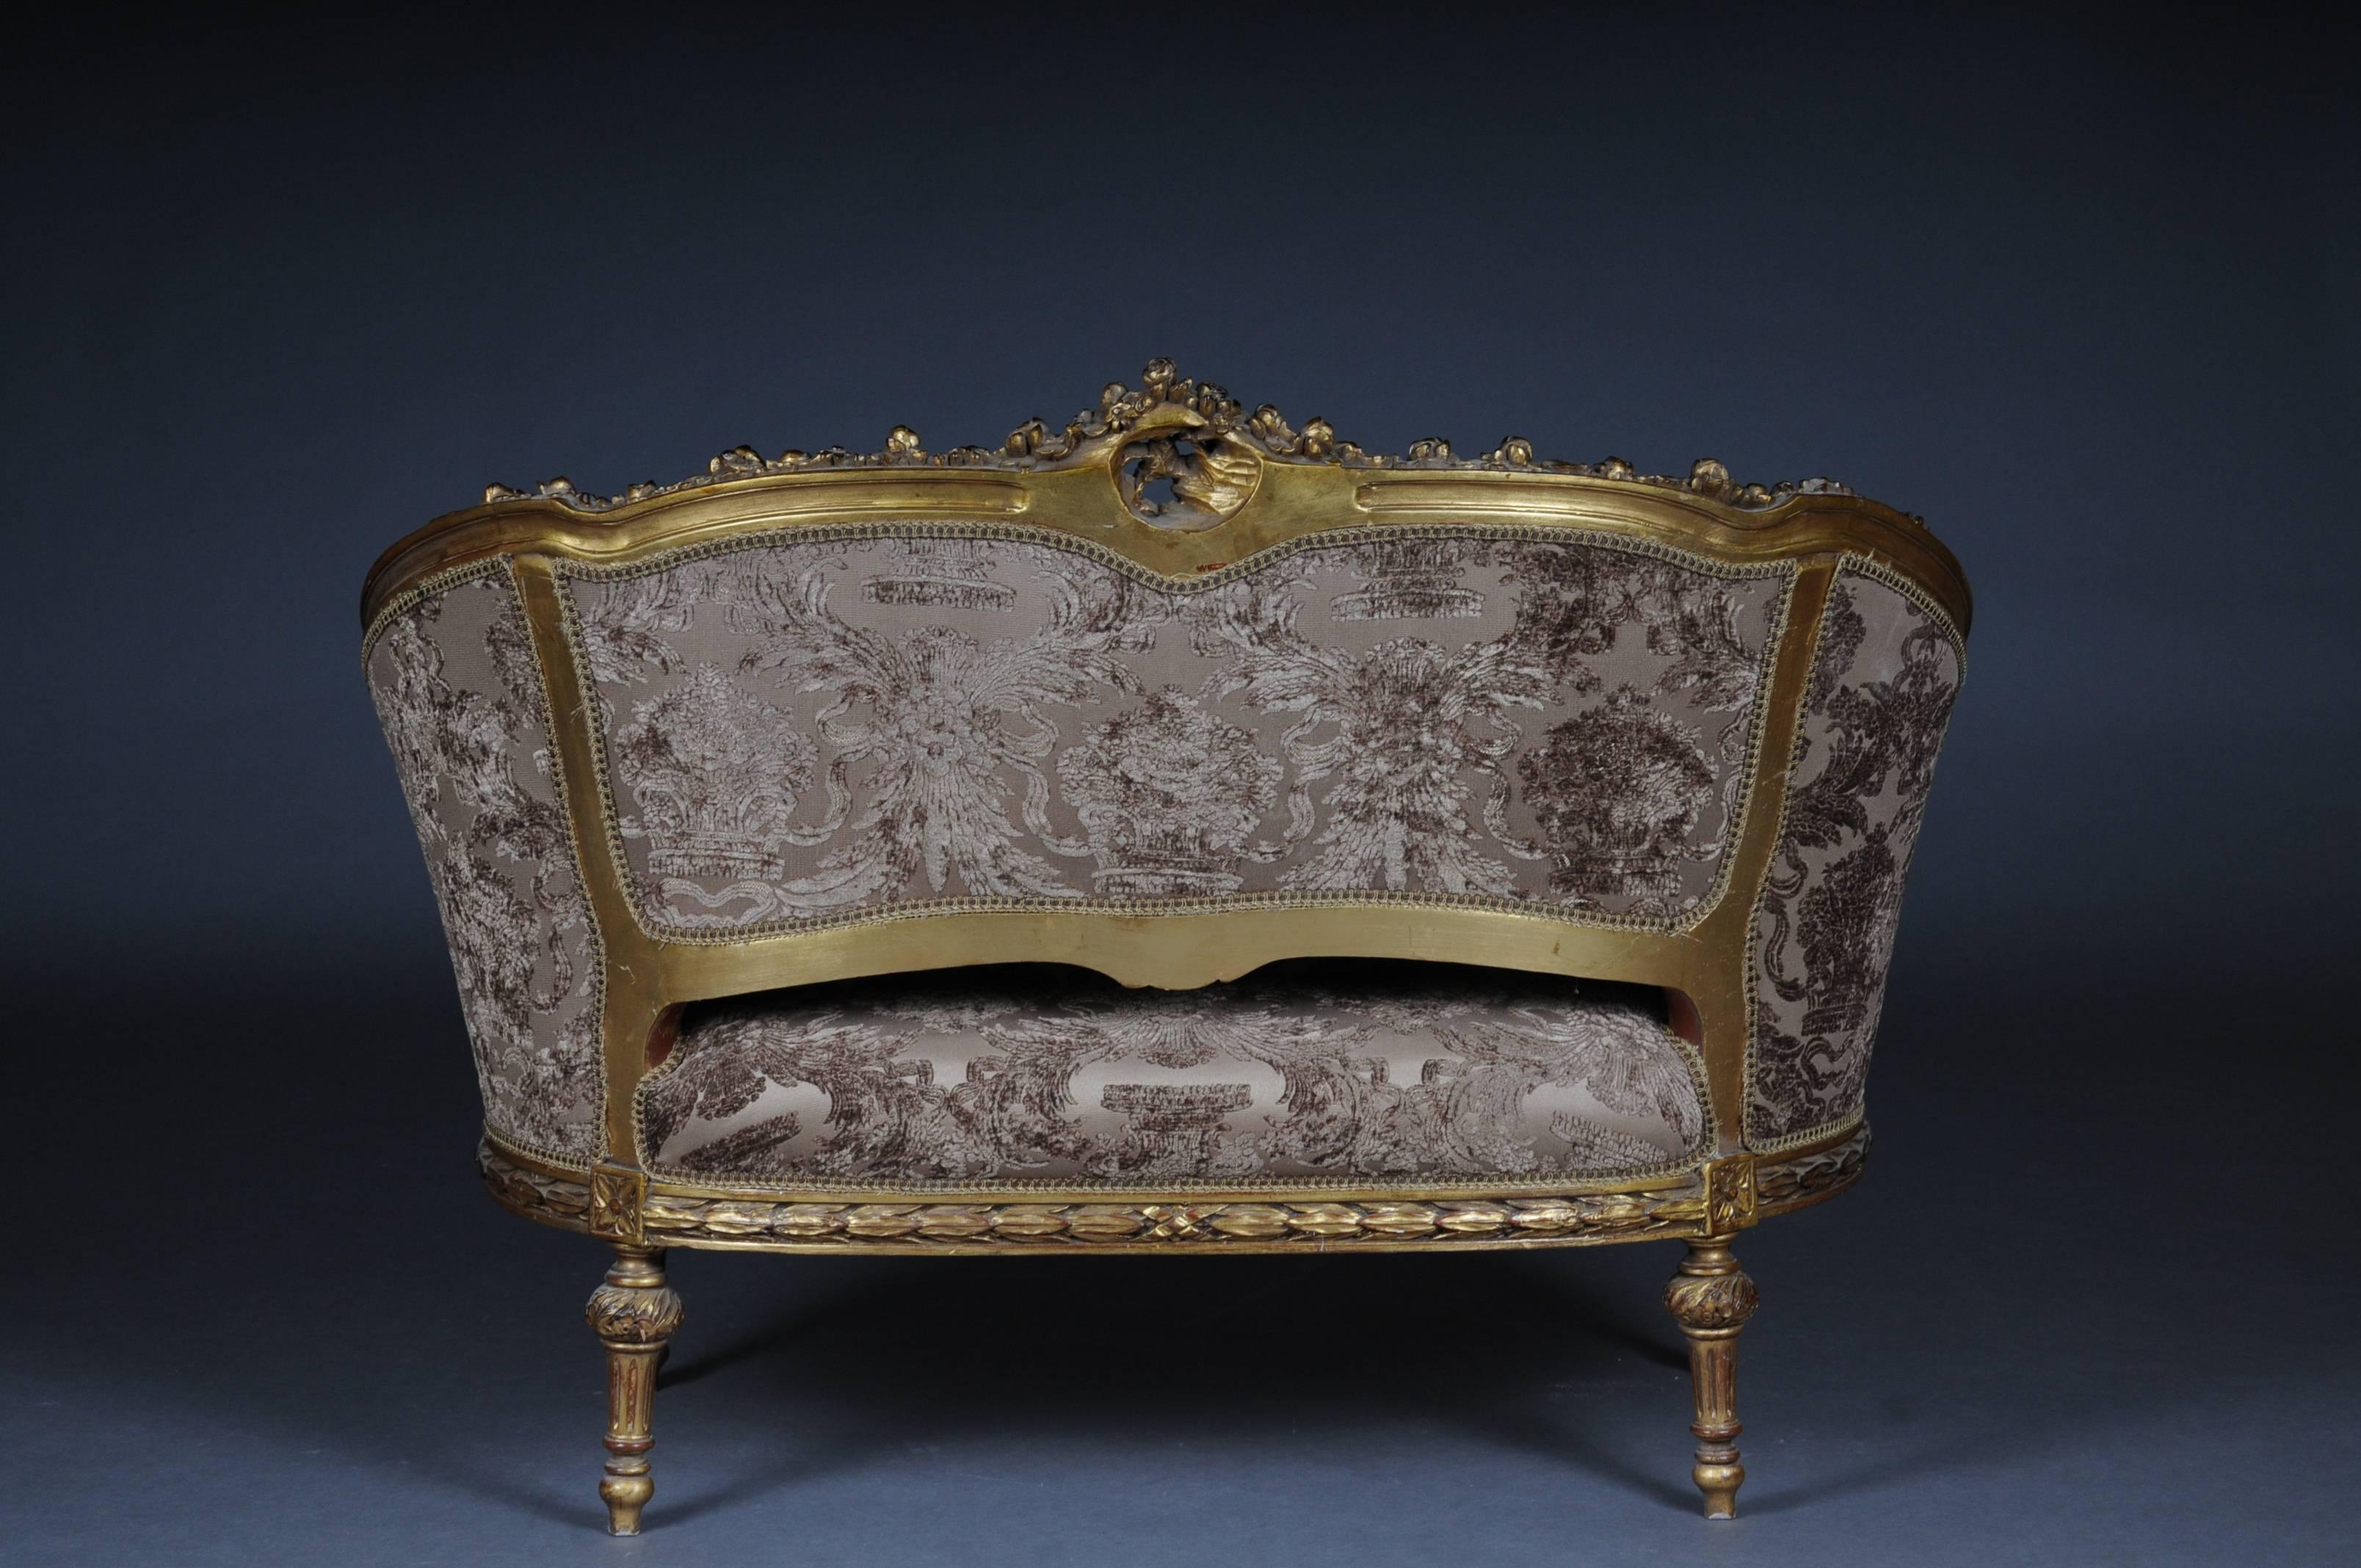 Decorative French Sofa, Canapé in Louis XVI Seize For Sale 5